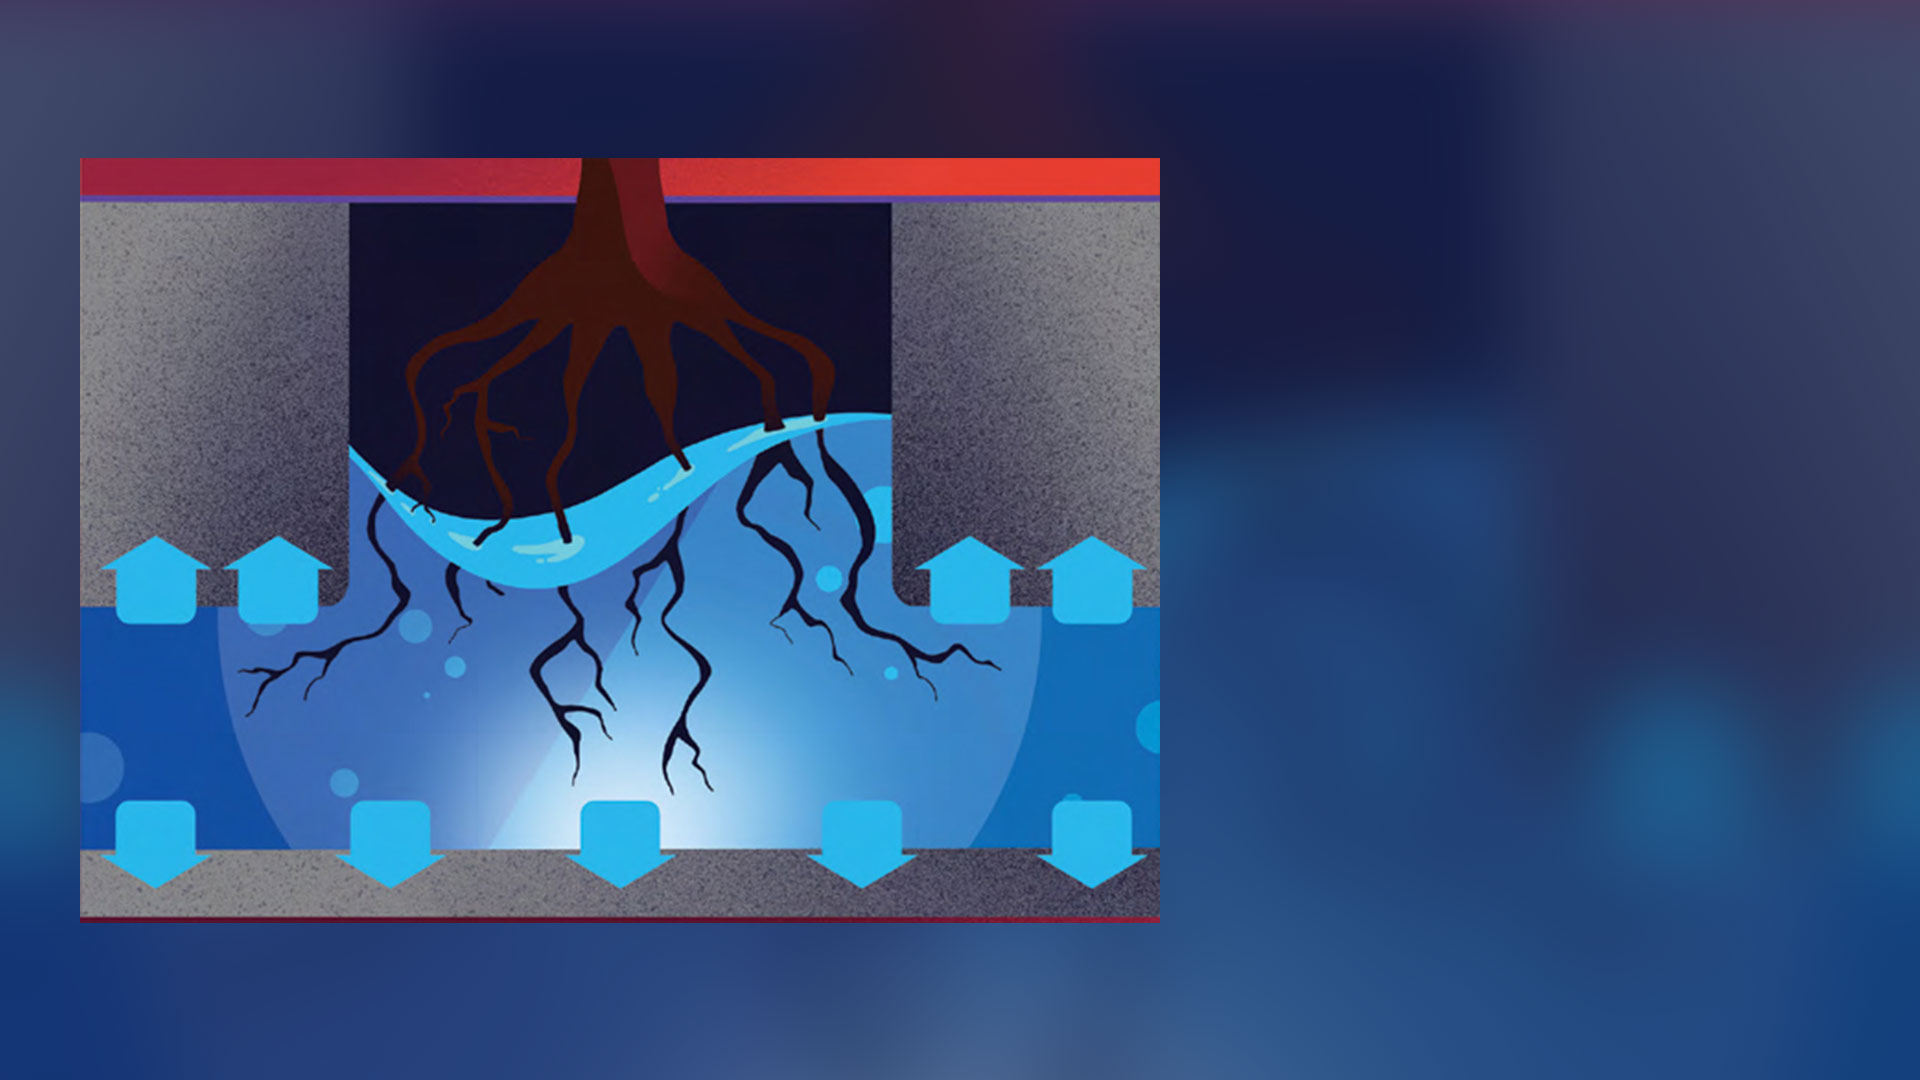 A graphic depicts an underground tree trench filled with water halfway up some tree roots while blue arrows point up and down around the water.